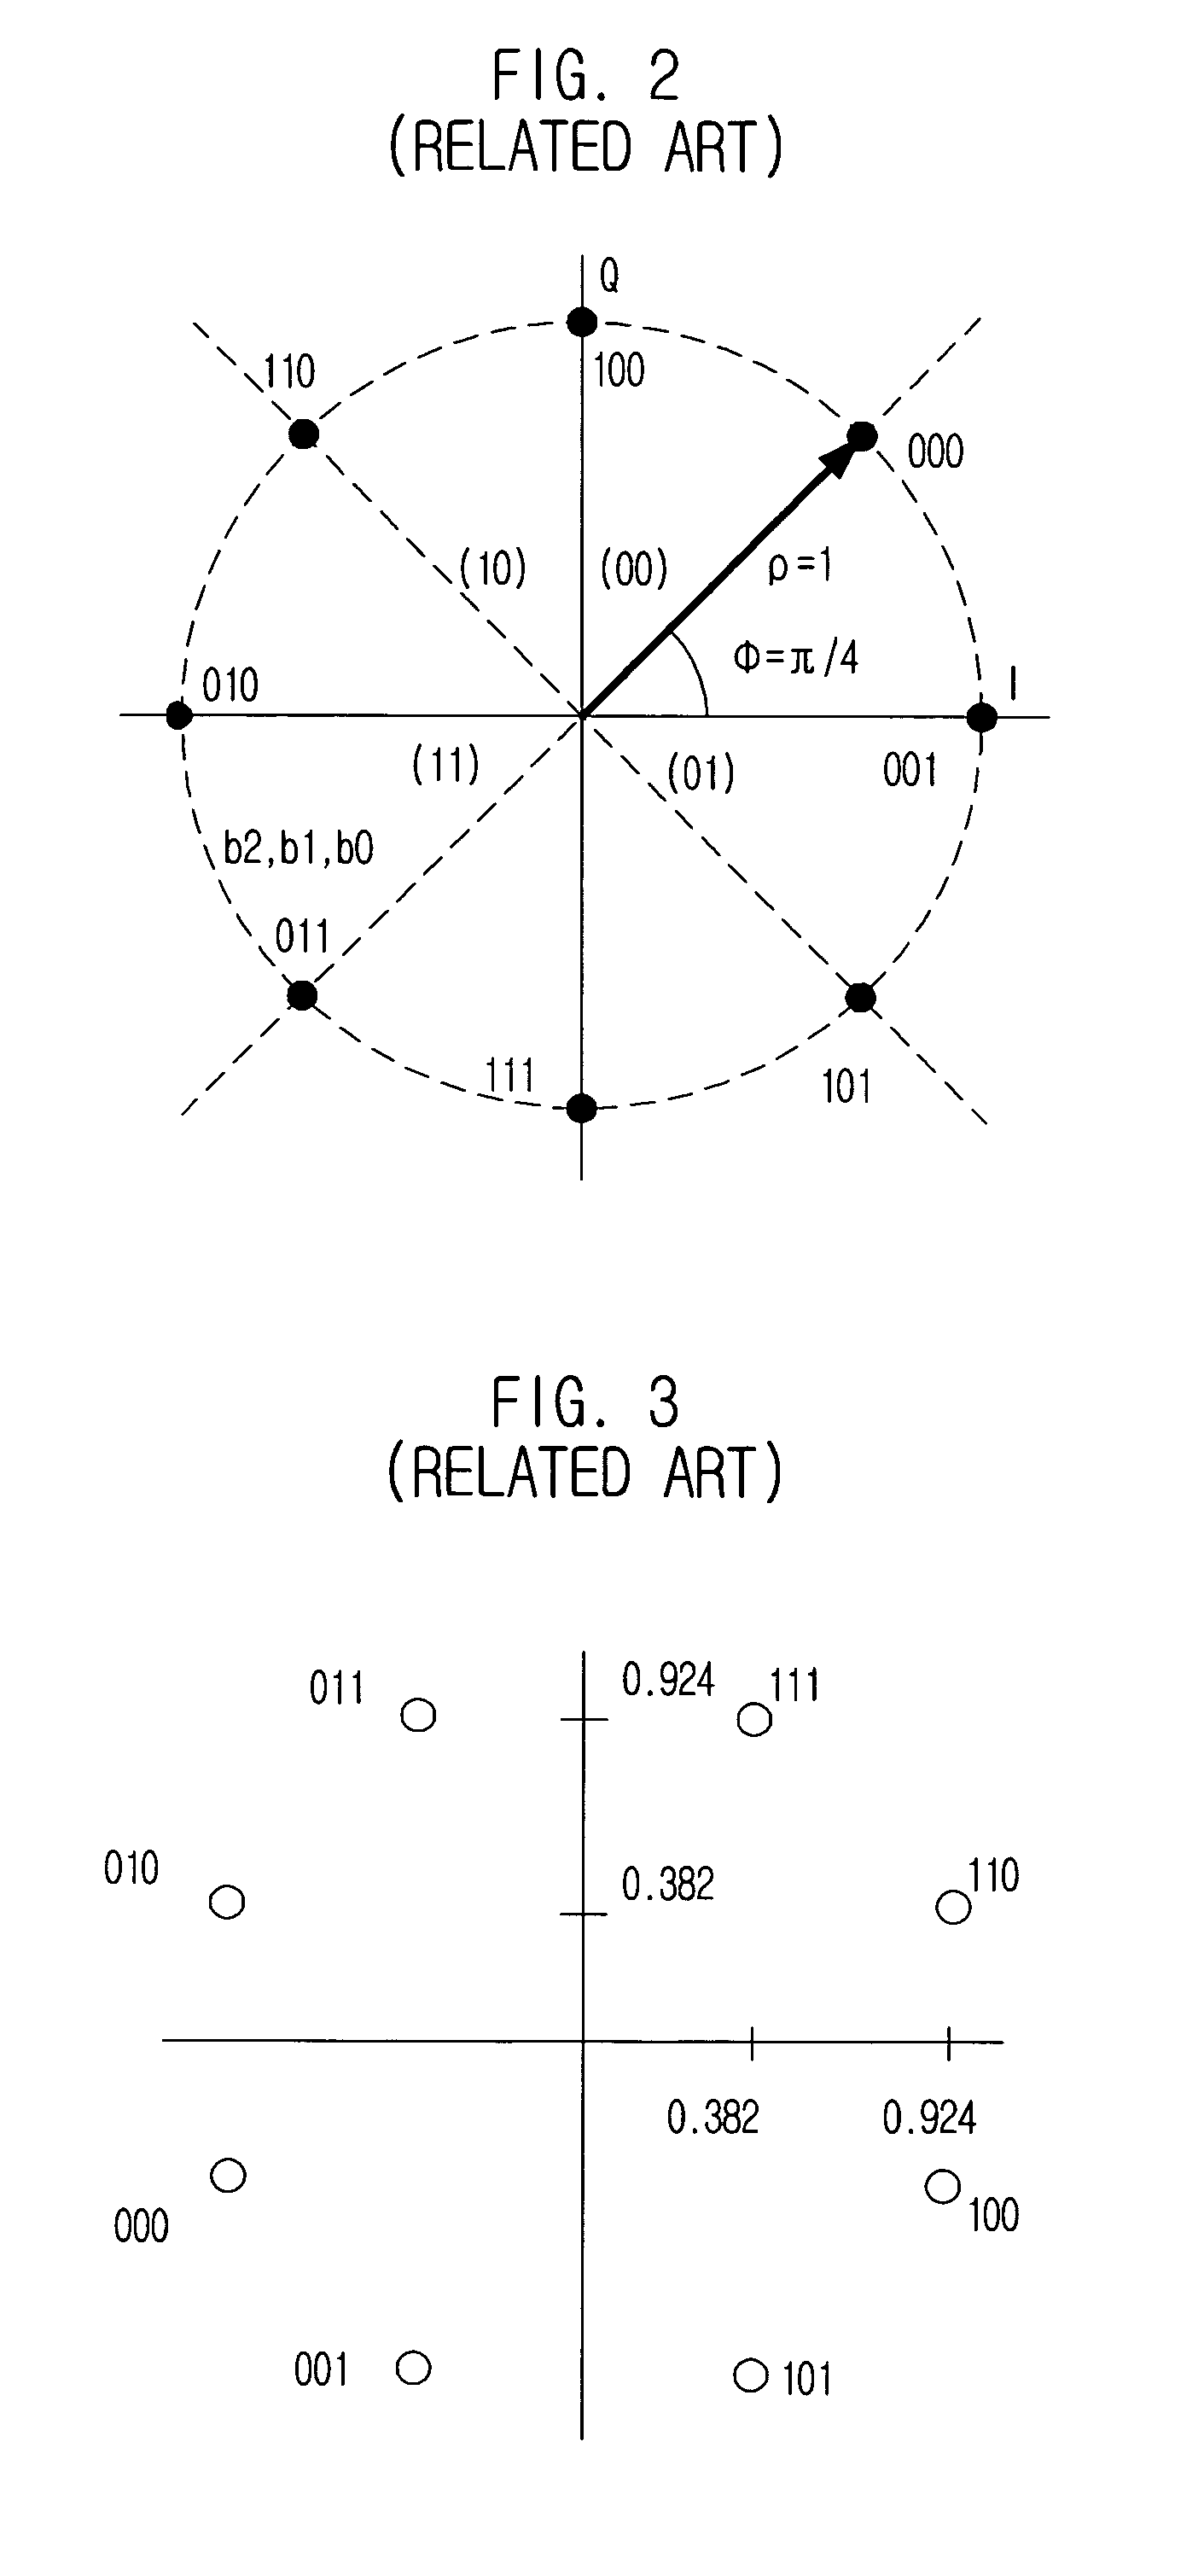 Soft decision demapping method suitable for higher-order modulation for iterative decoder and error correction apparatus using the same